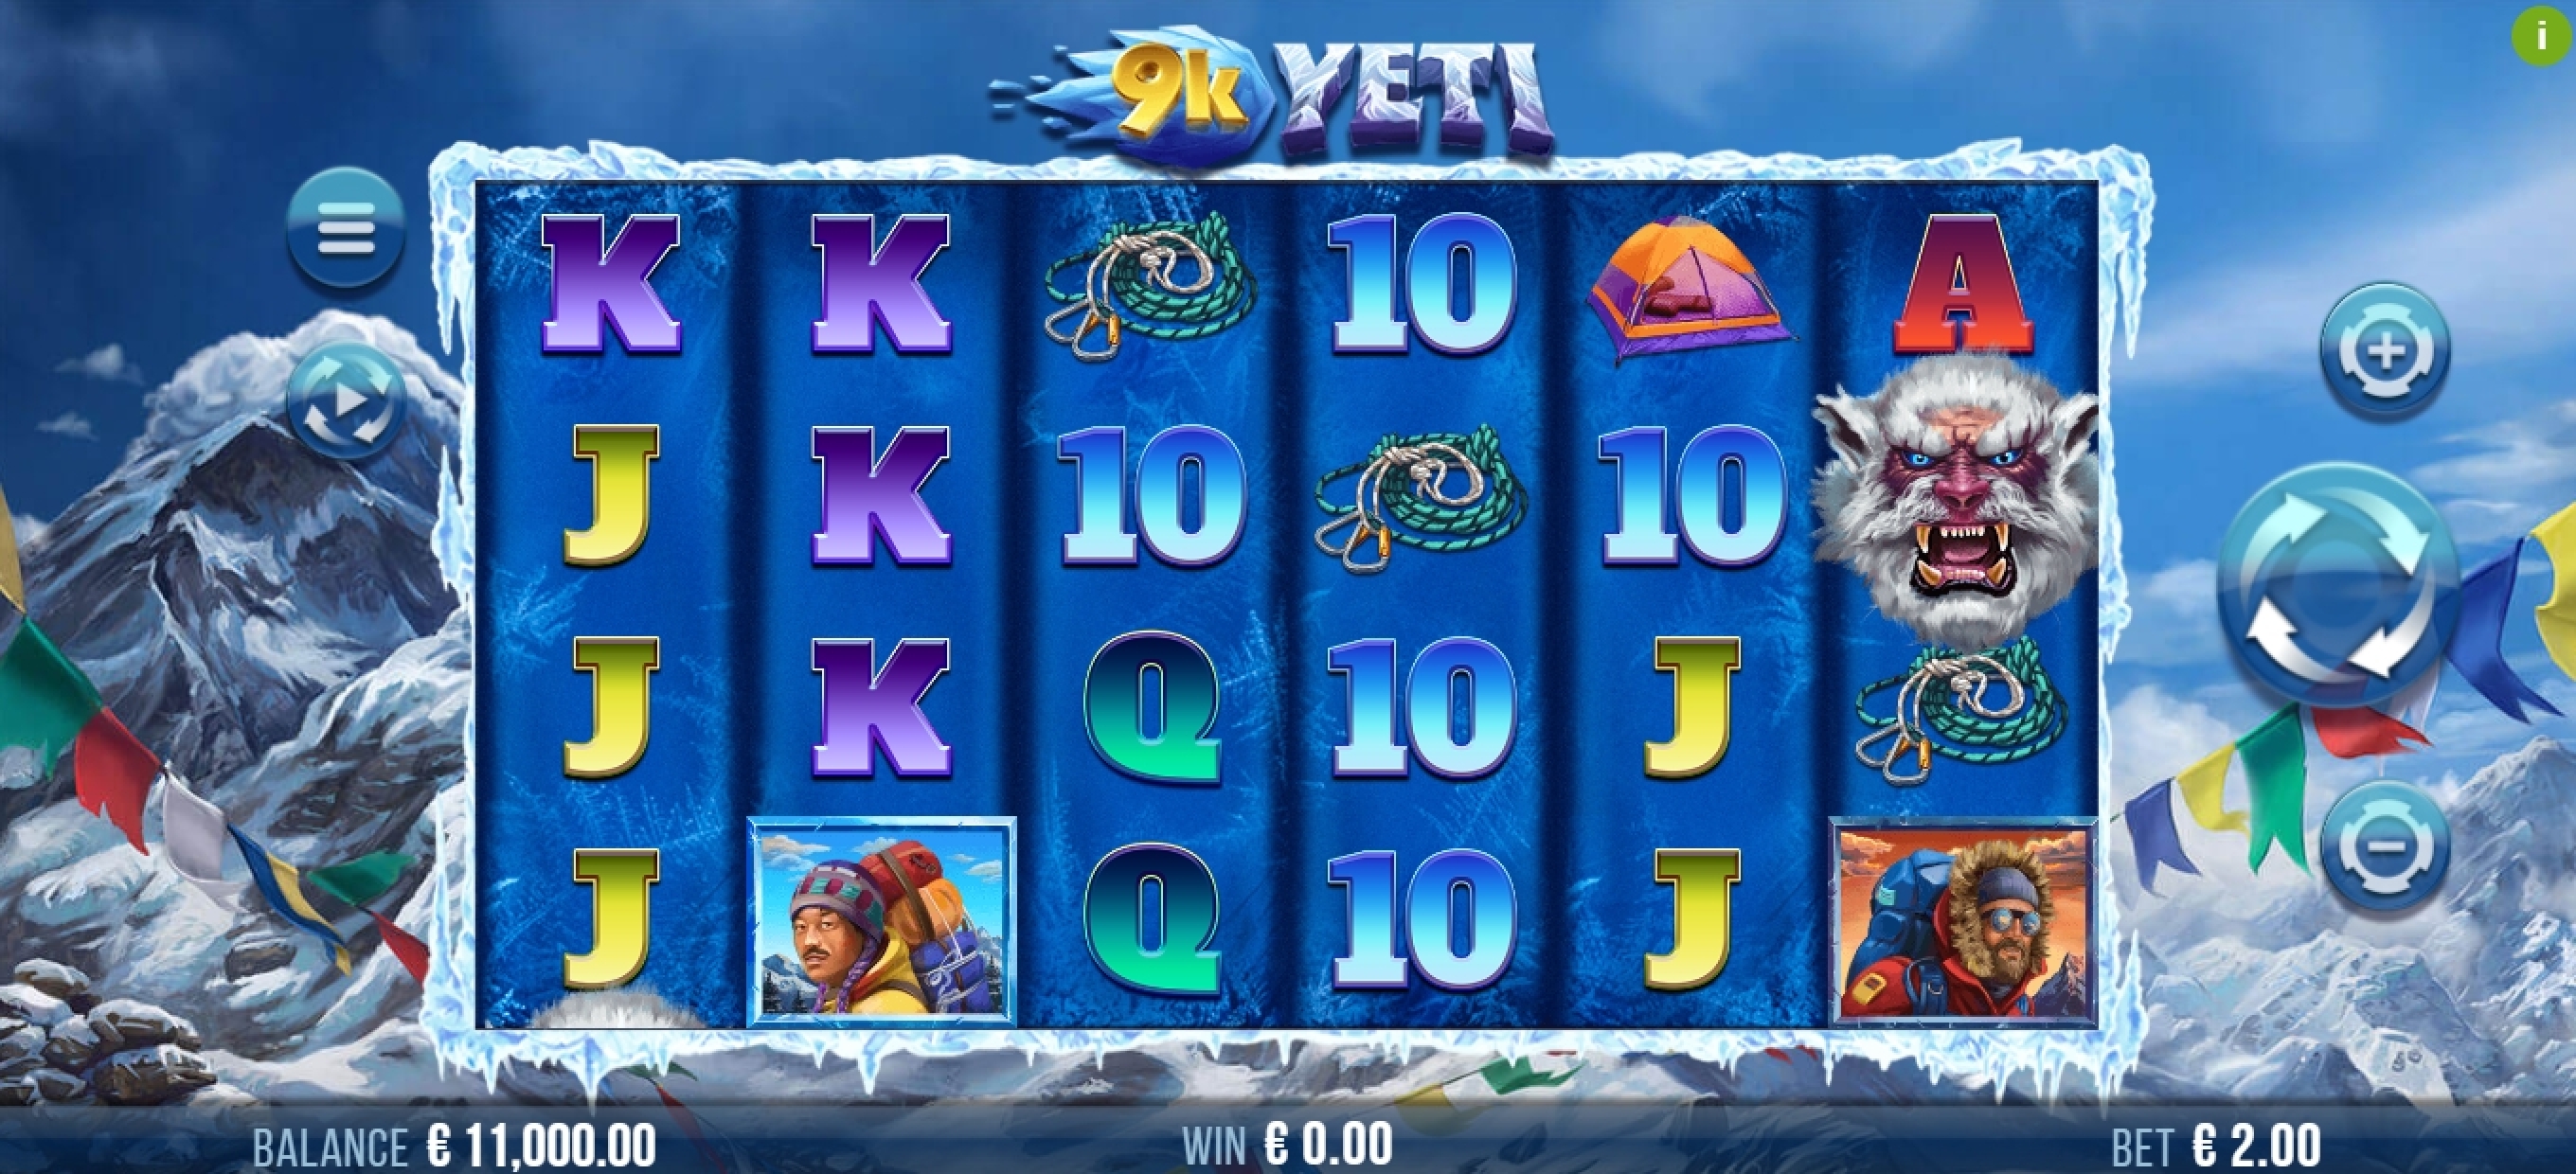 Reels in 9K Yeti Slot Game by 4ThePlayer